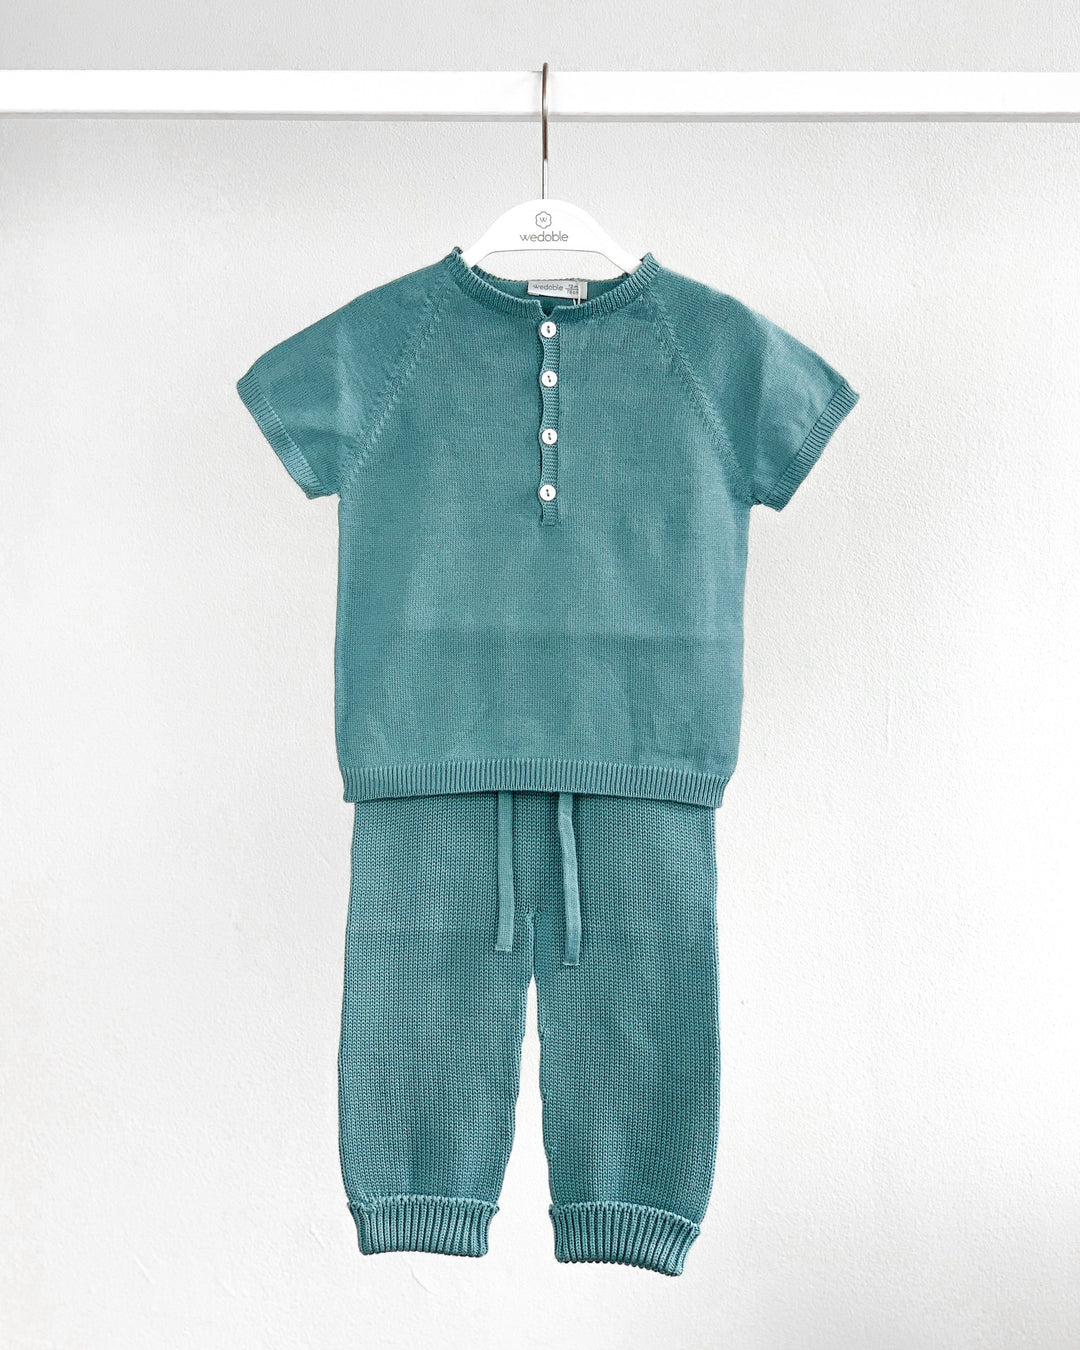 Wedoble "Herbie" Teal Knitted Tracksuit | Millie and John